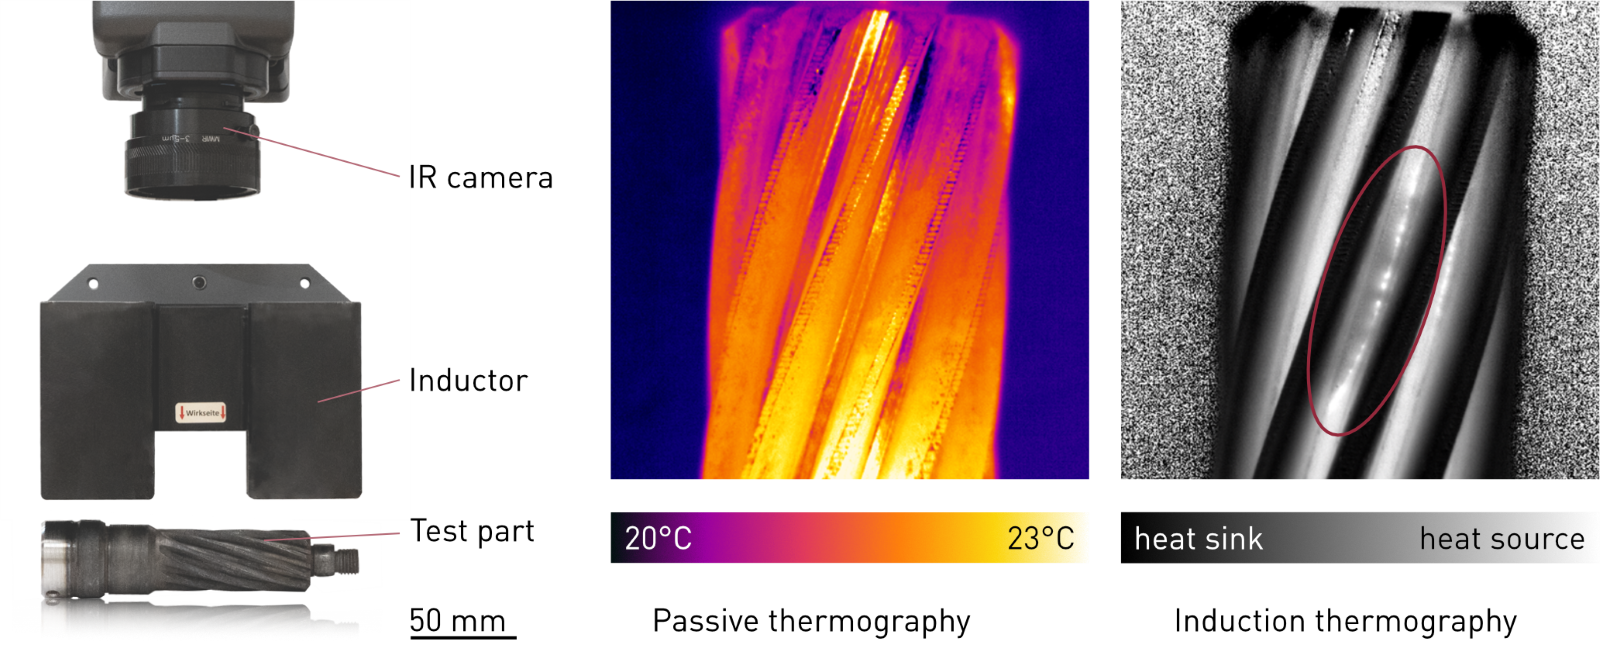 A typical induction setup with infrared camera, inductor and test part, Induction thermography